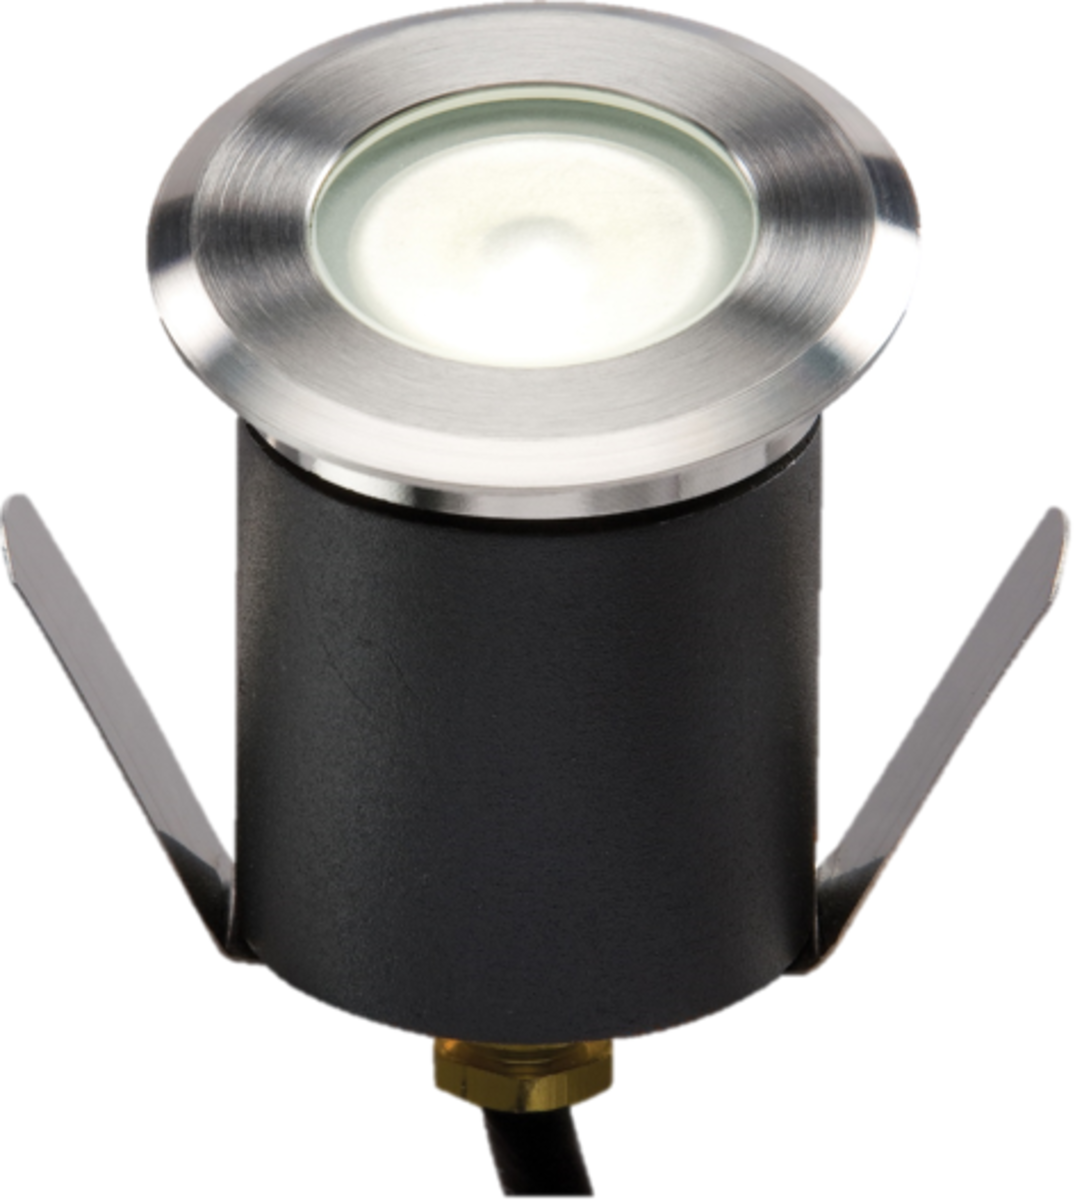 Knightsbridge 230V IP65 1.5W High Output LED Mini Ground Light comes with cable. Non-Dimmable